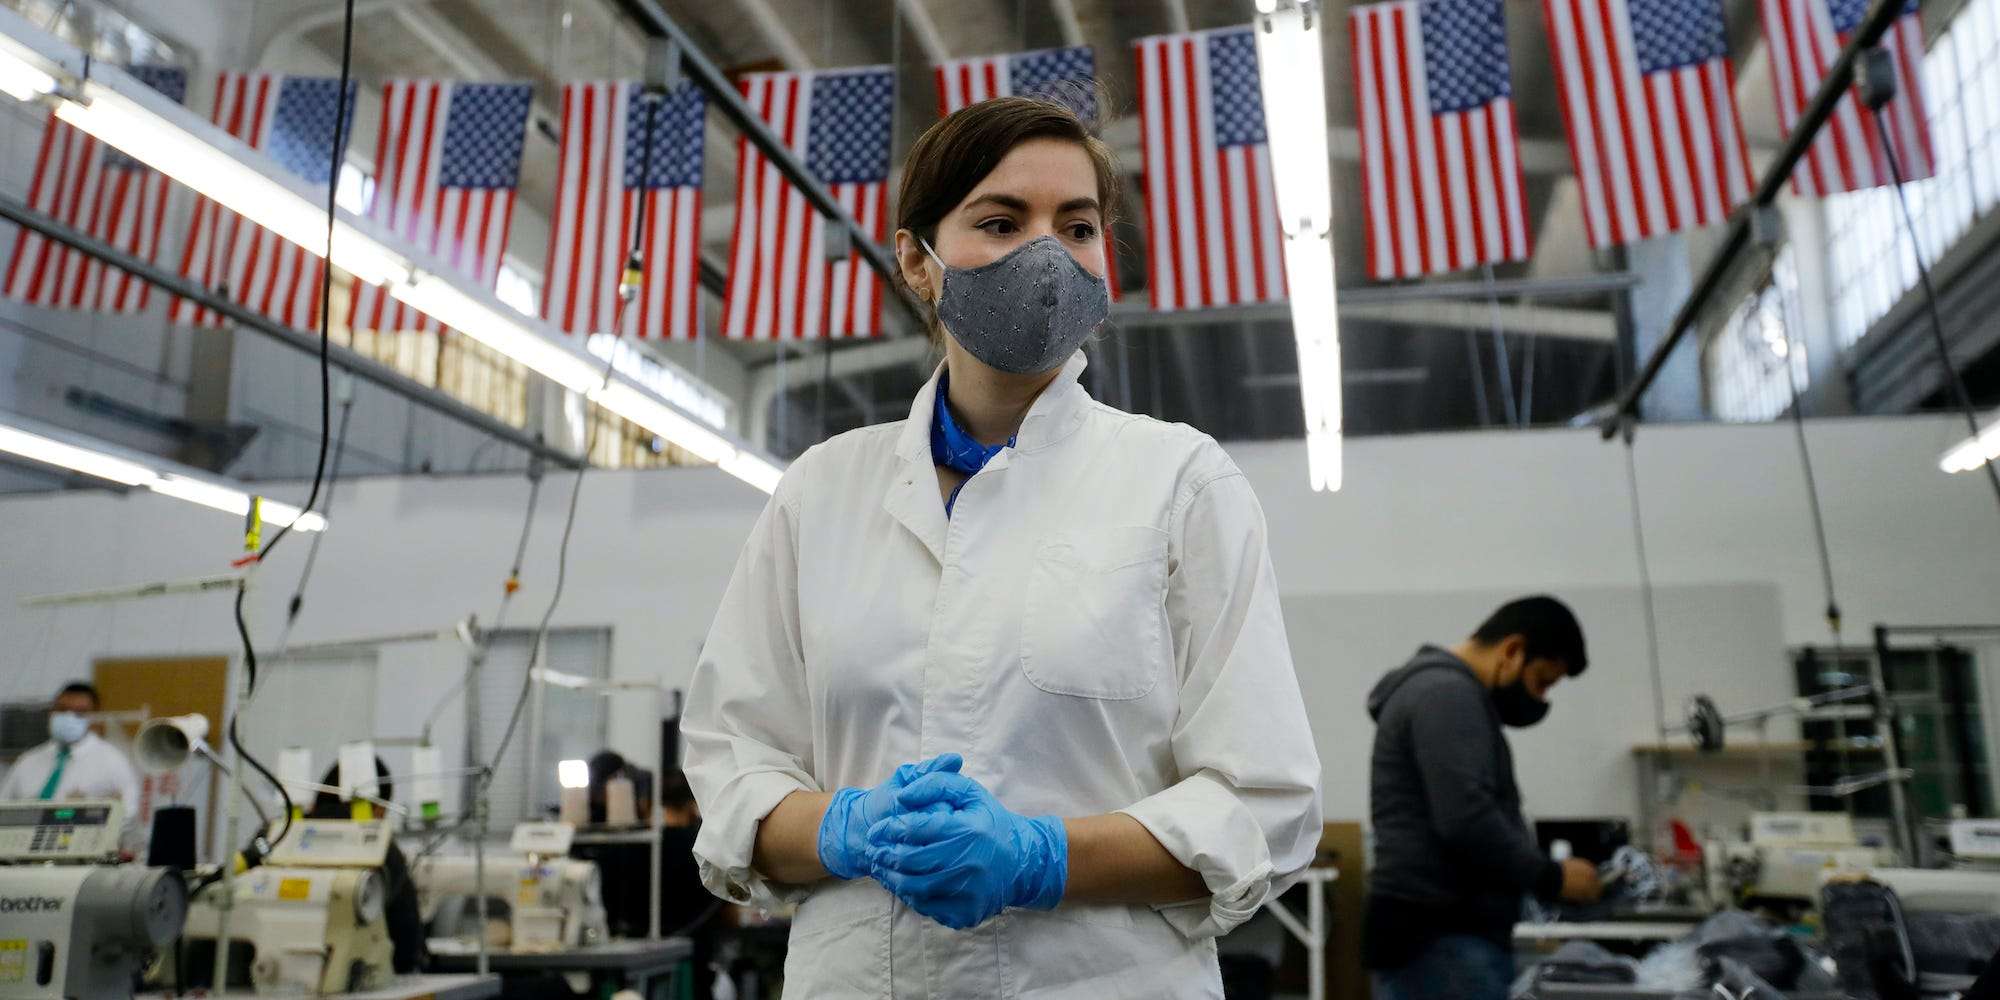 5 Factory Workers Describe Their Work Making Face Shields And Masks